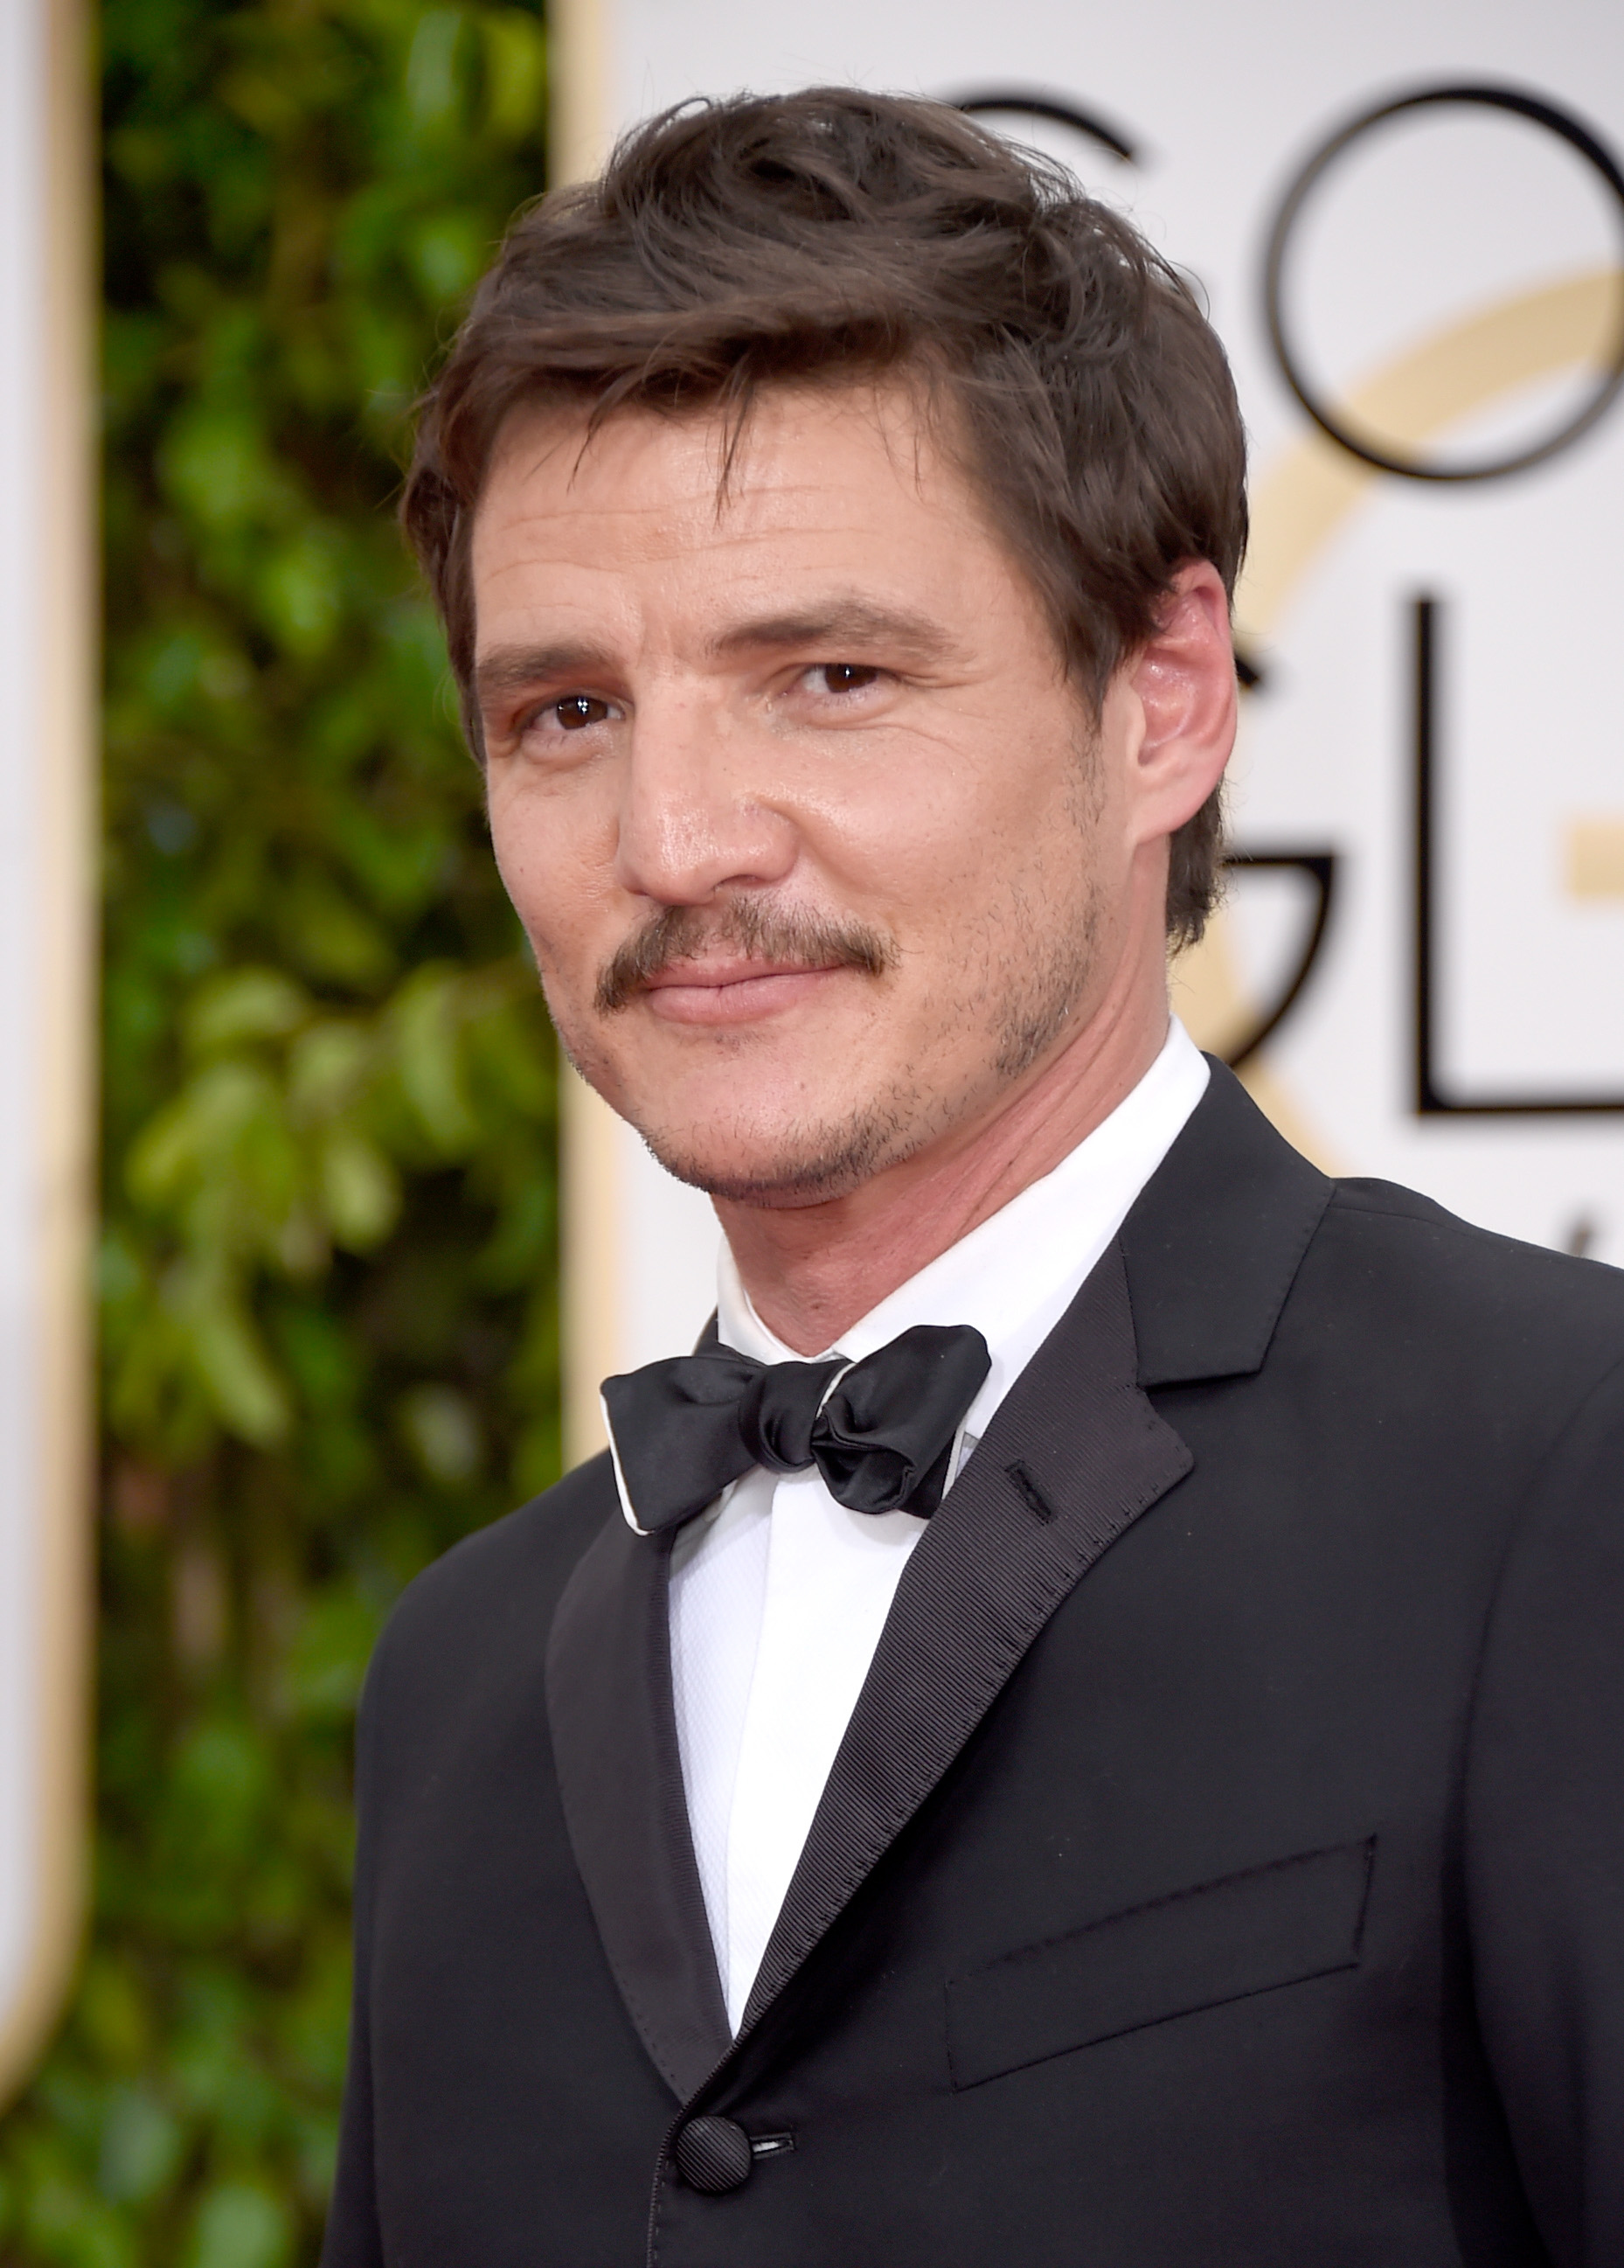 Pedro Pascal attends the 72nd Annual Golden Globe Awards at The Beverly Hilton Hotel on Jan. 11, 2015 in Beverly Hills, Calif.